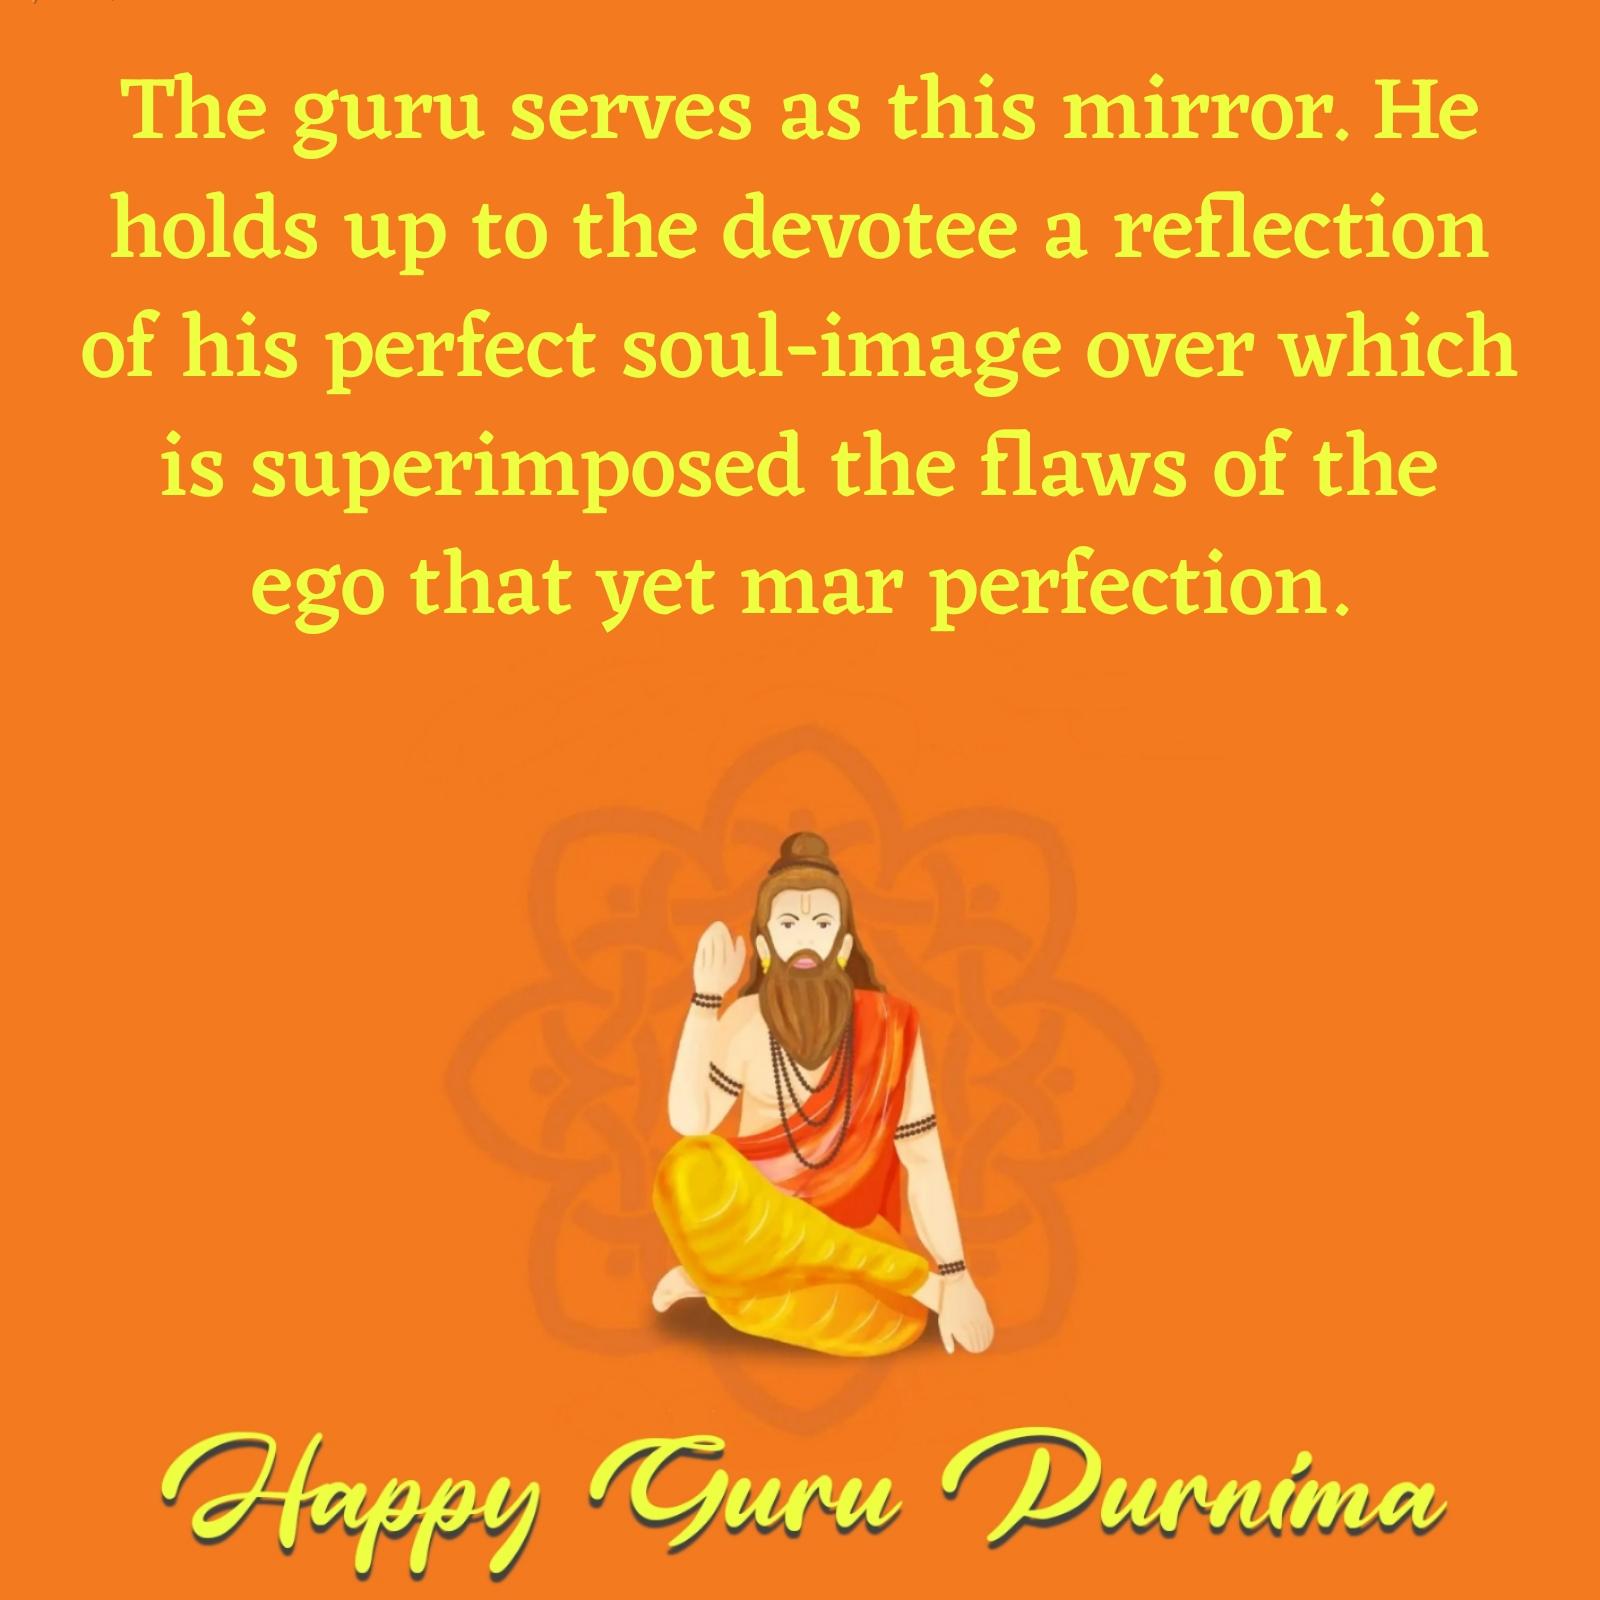 The guru serves as this mirror He holds up to the devotee a reflection